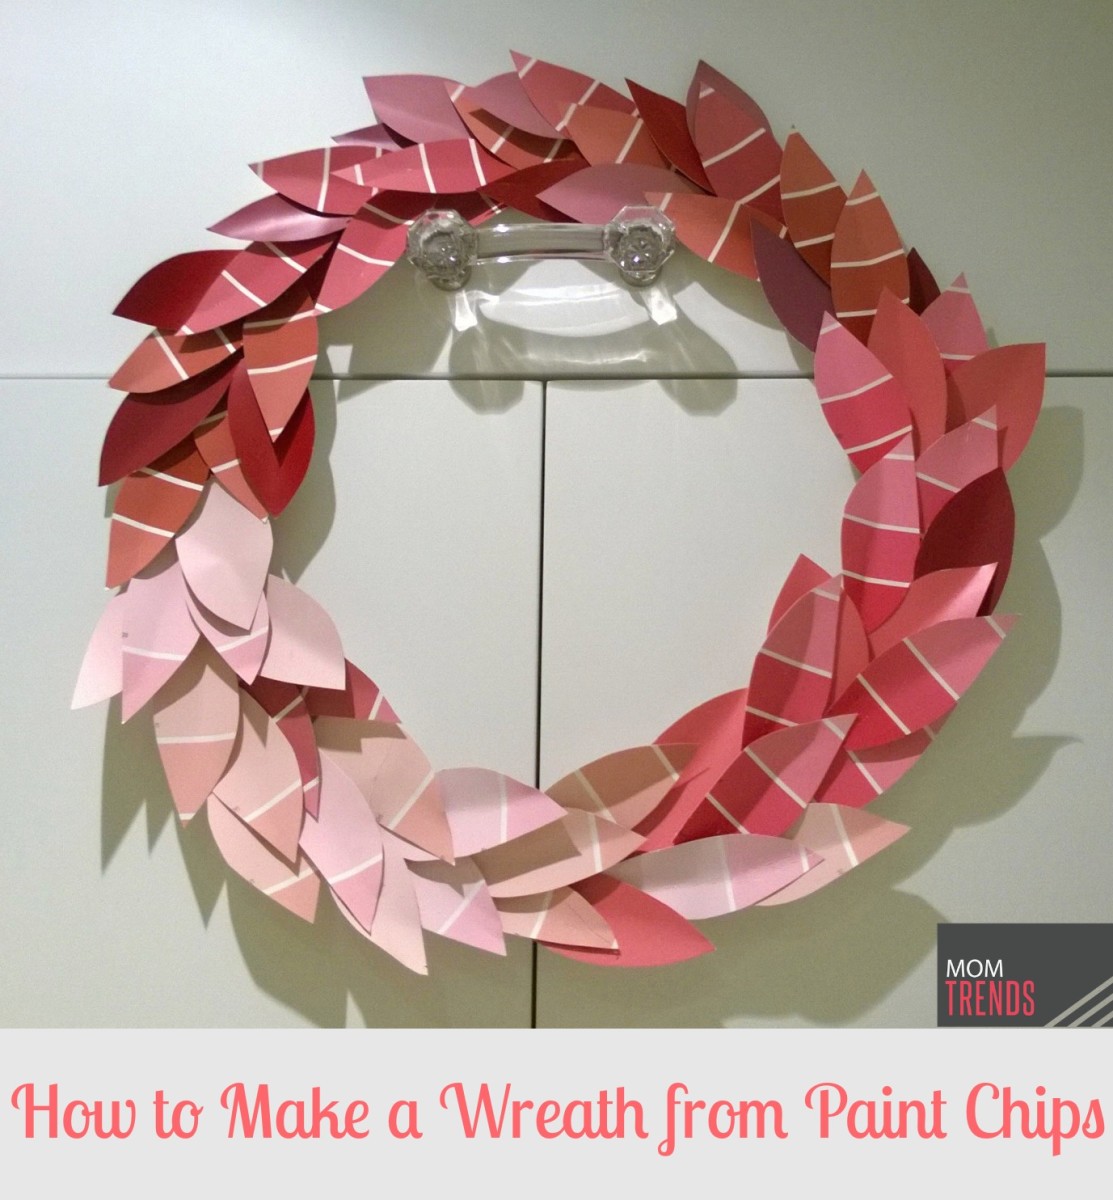 How to Make a Wreath from Paint Chips